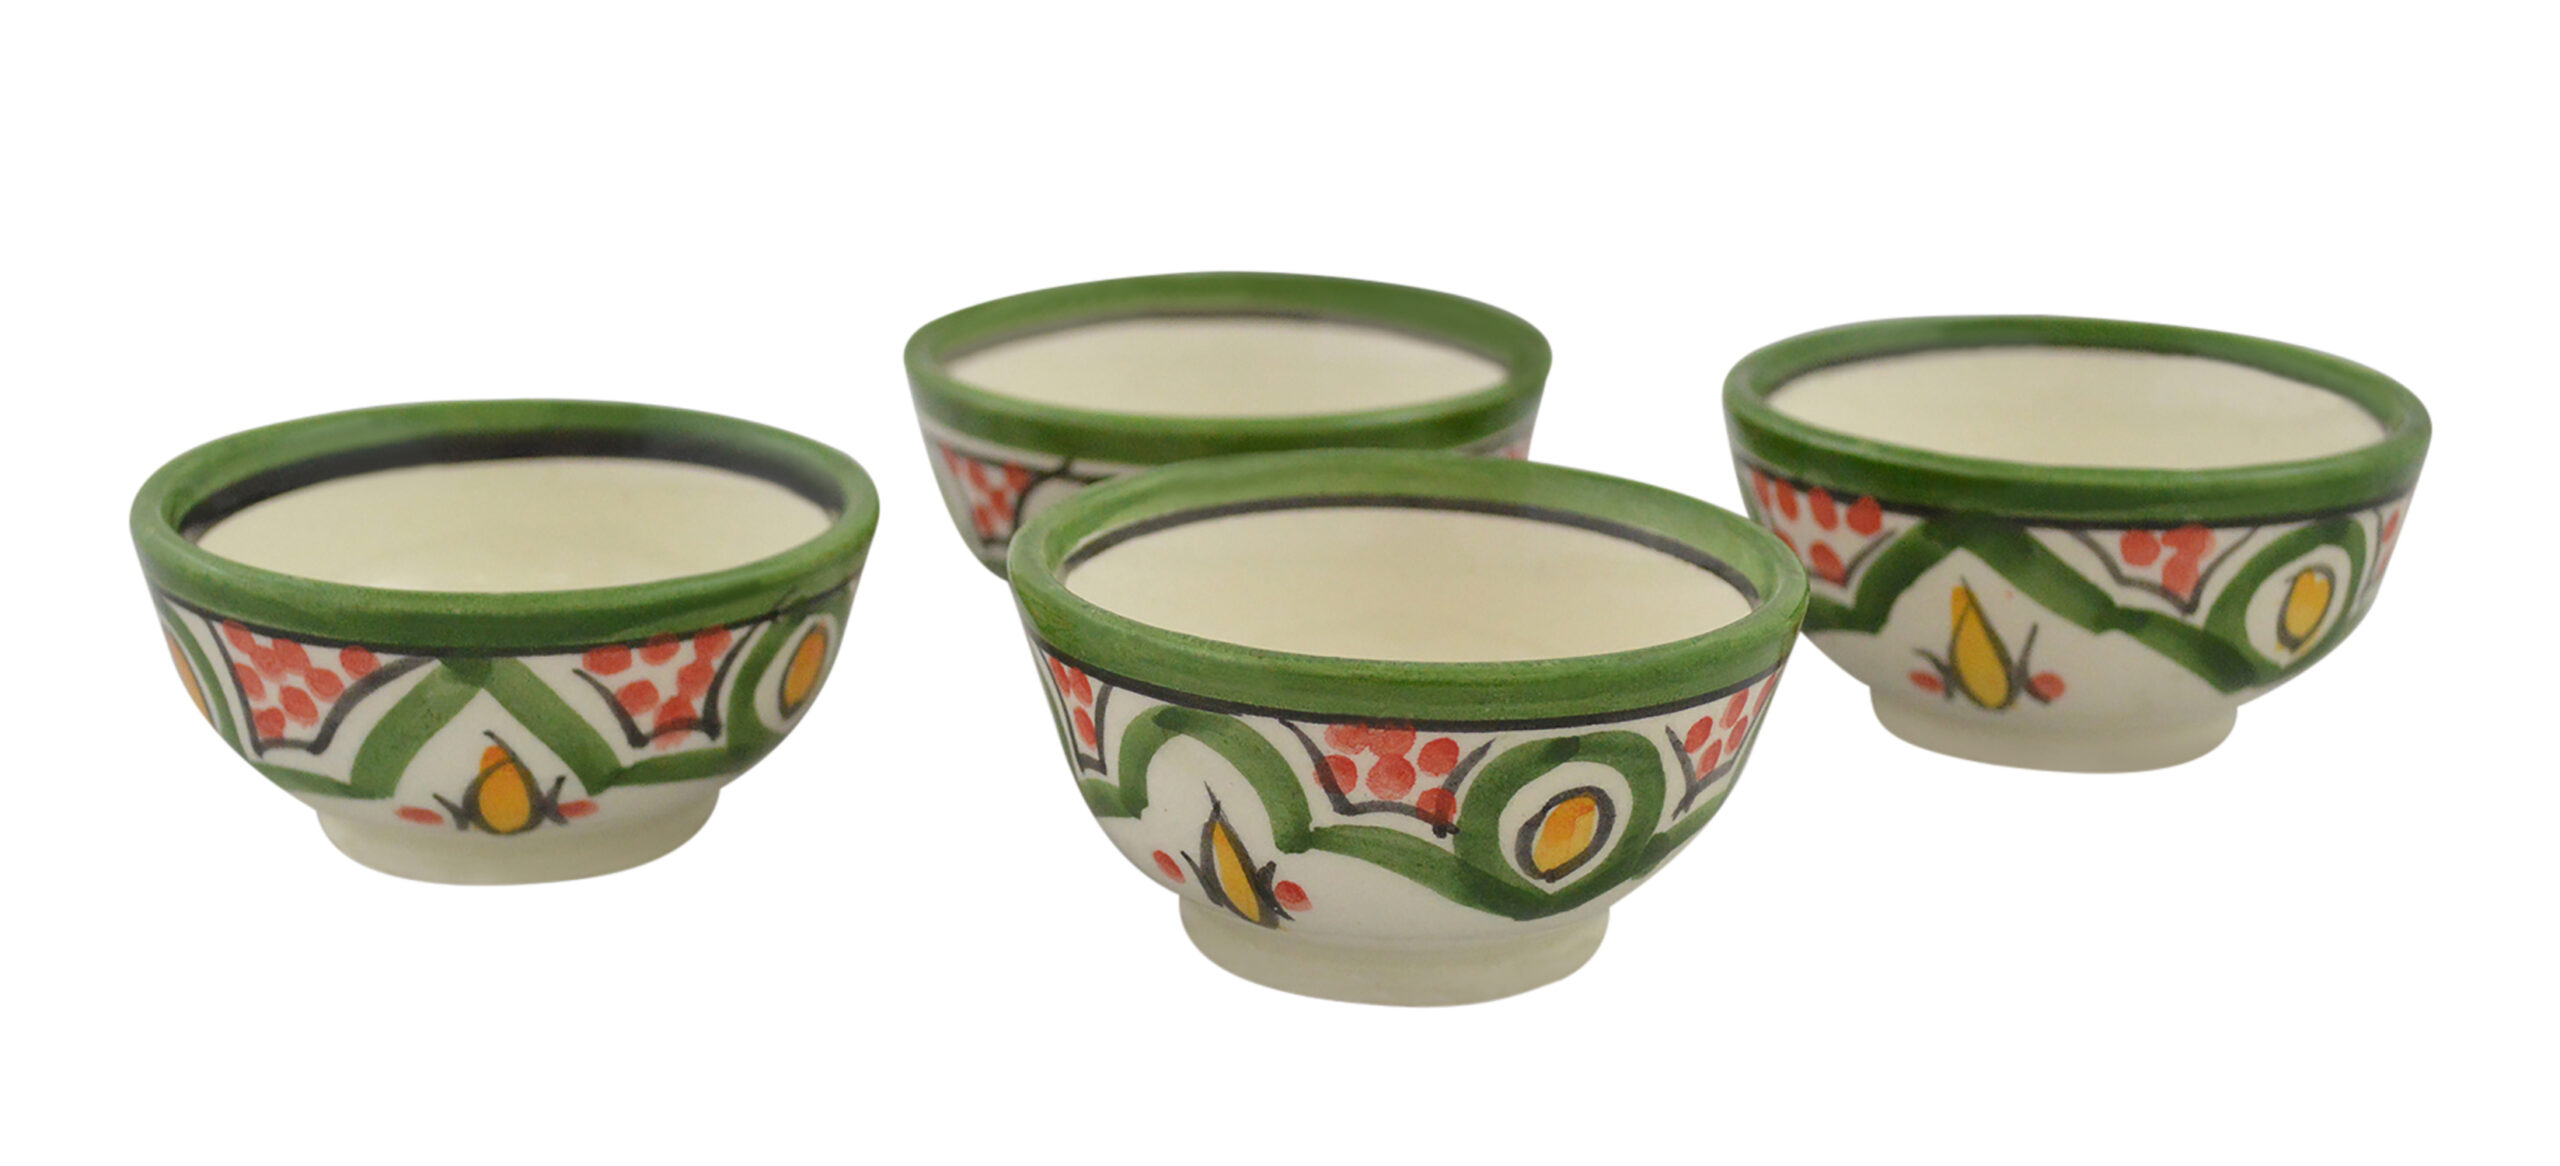 Handmade Green & White Marble Sauce Cups - Dipping Bowl Cup Set – Marblic